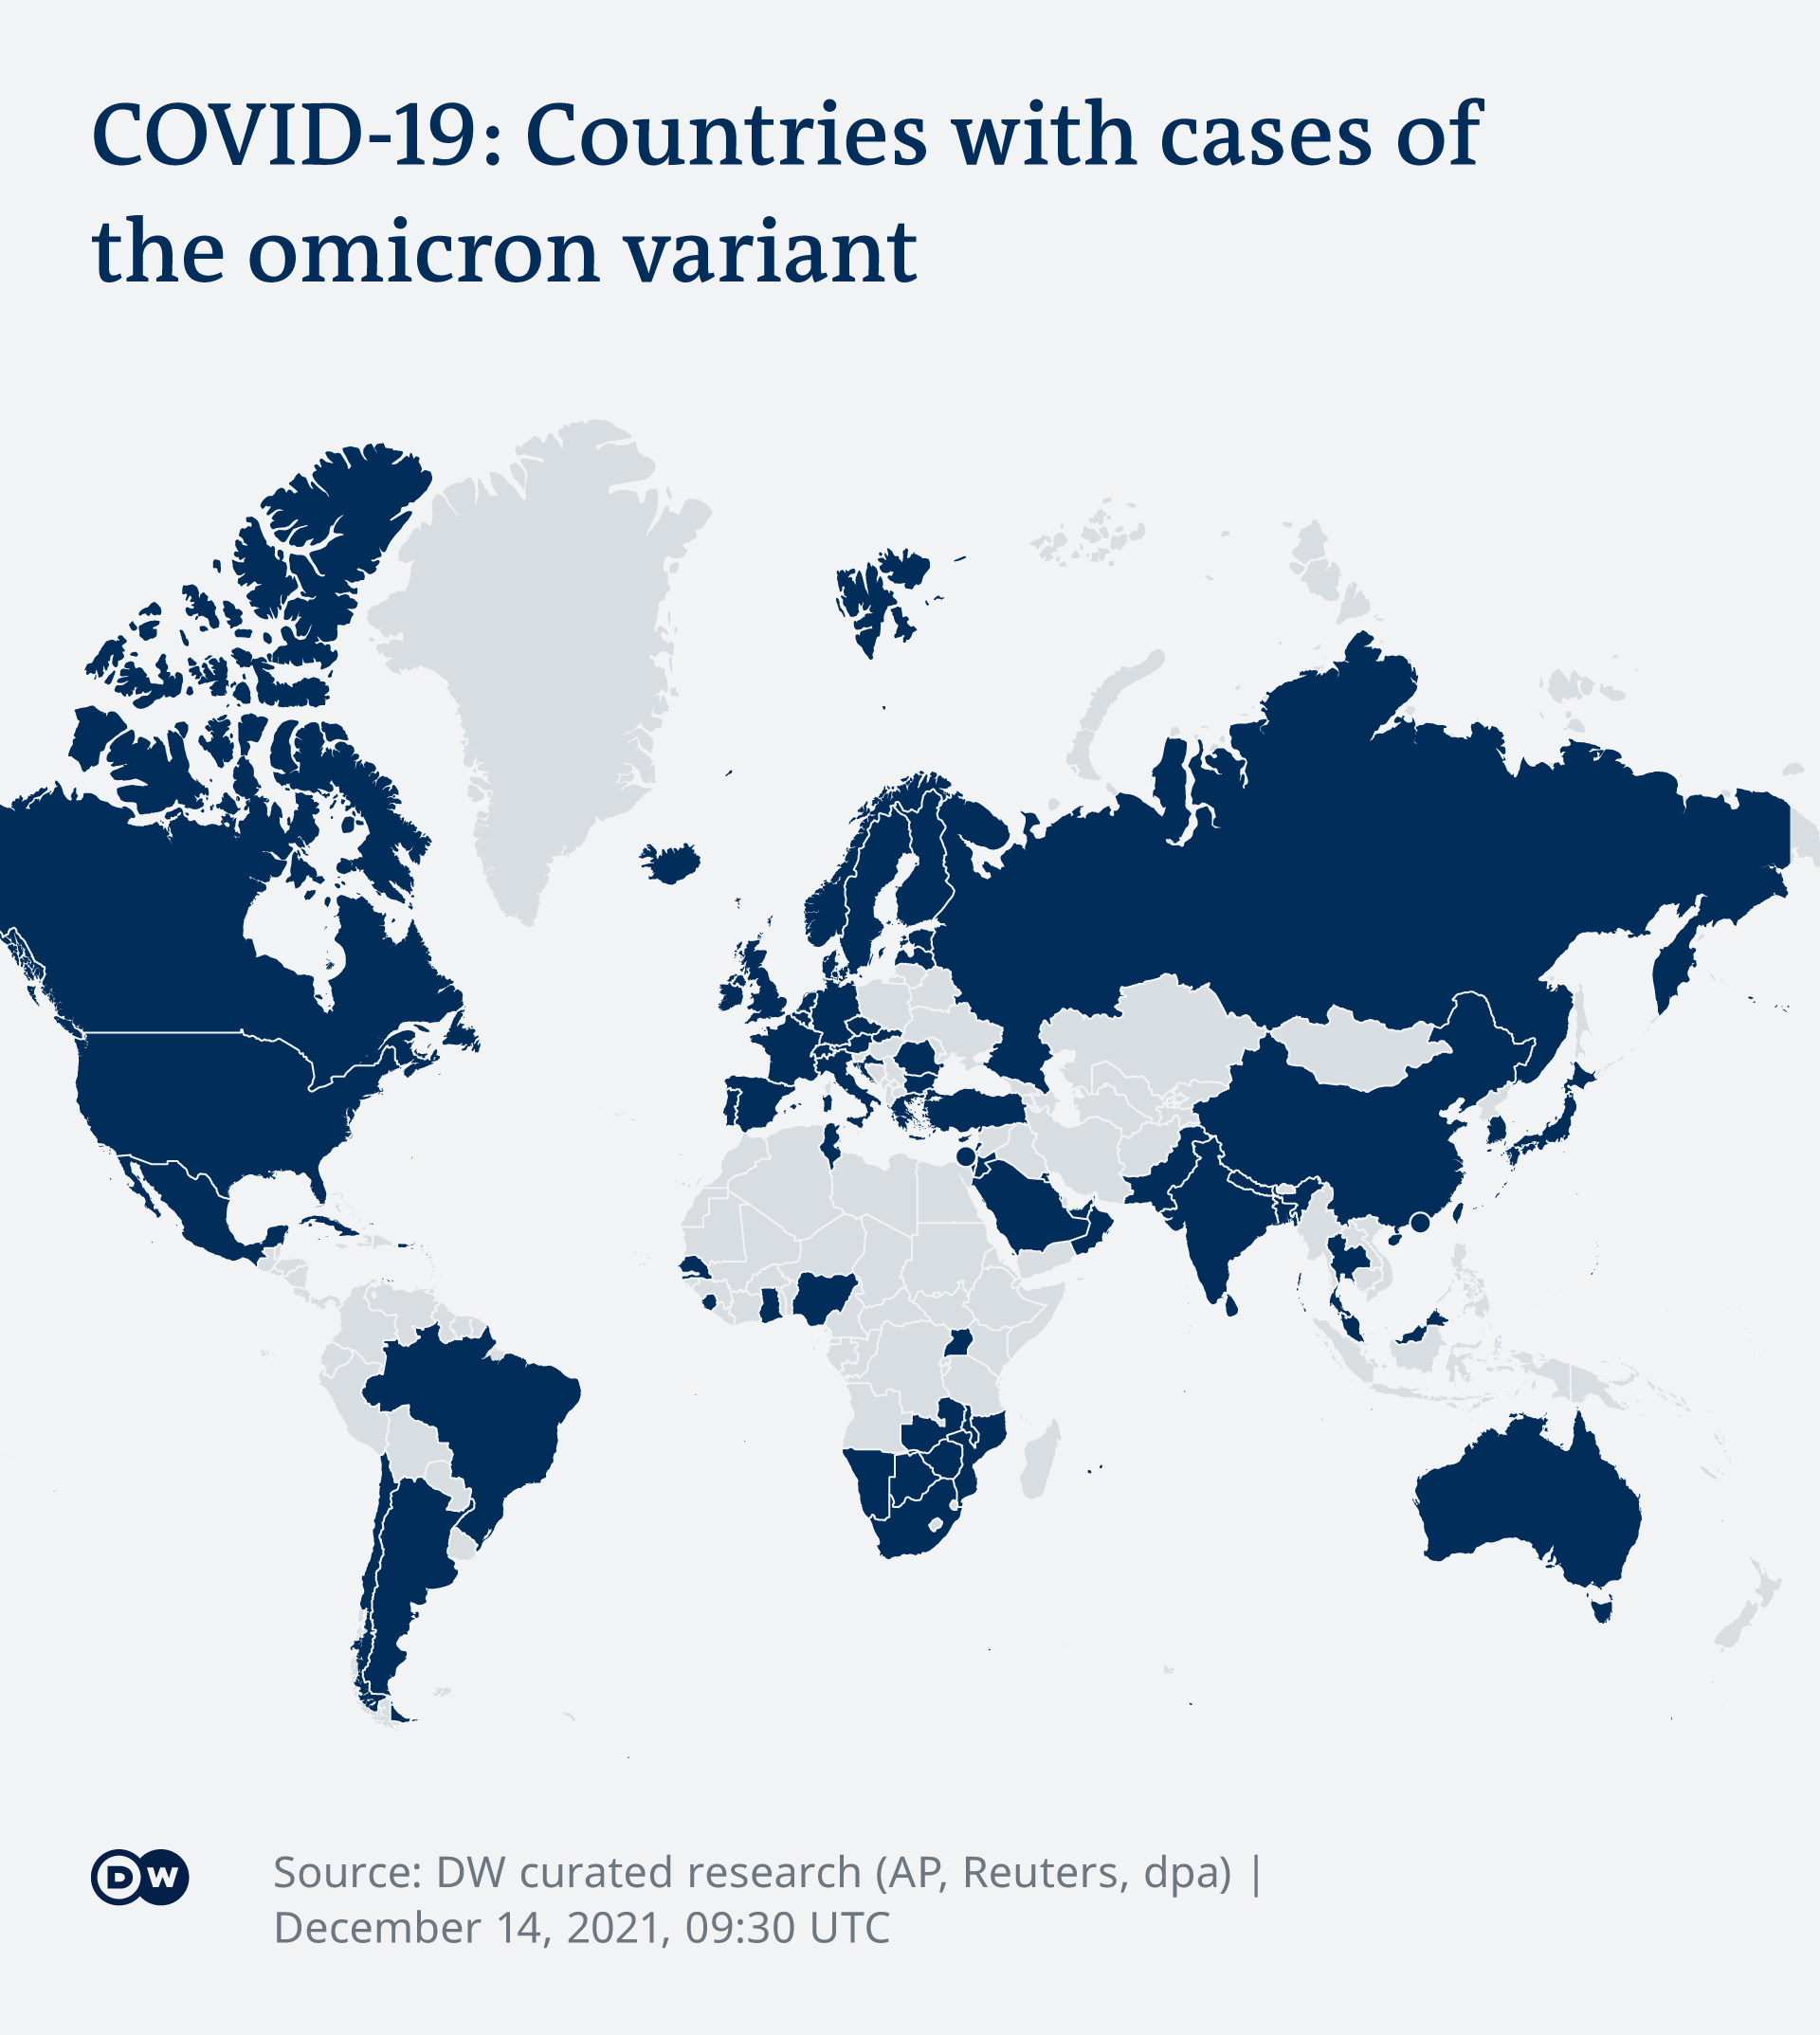 Infographic illustrating countries with records of the omicron variant of COVID-19 (as at 14.12.2021)